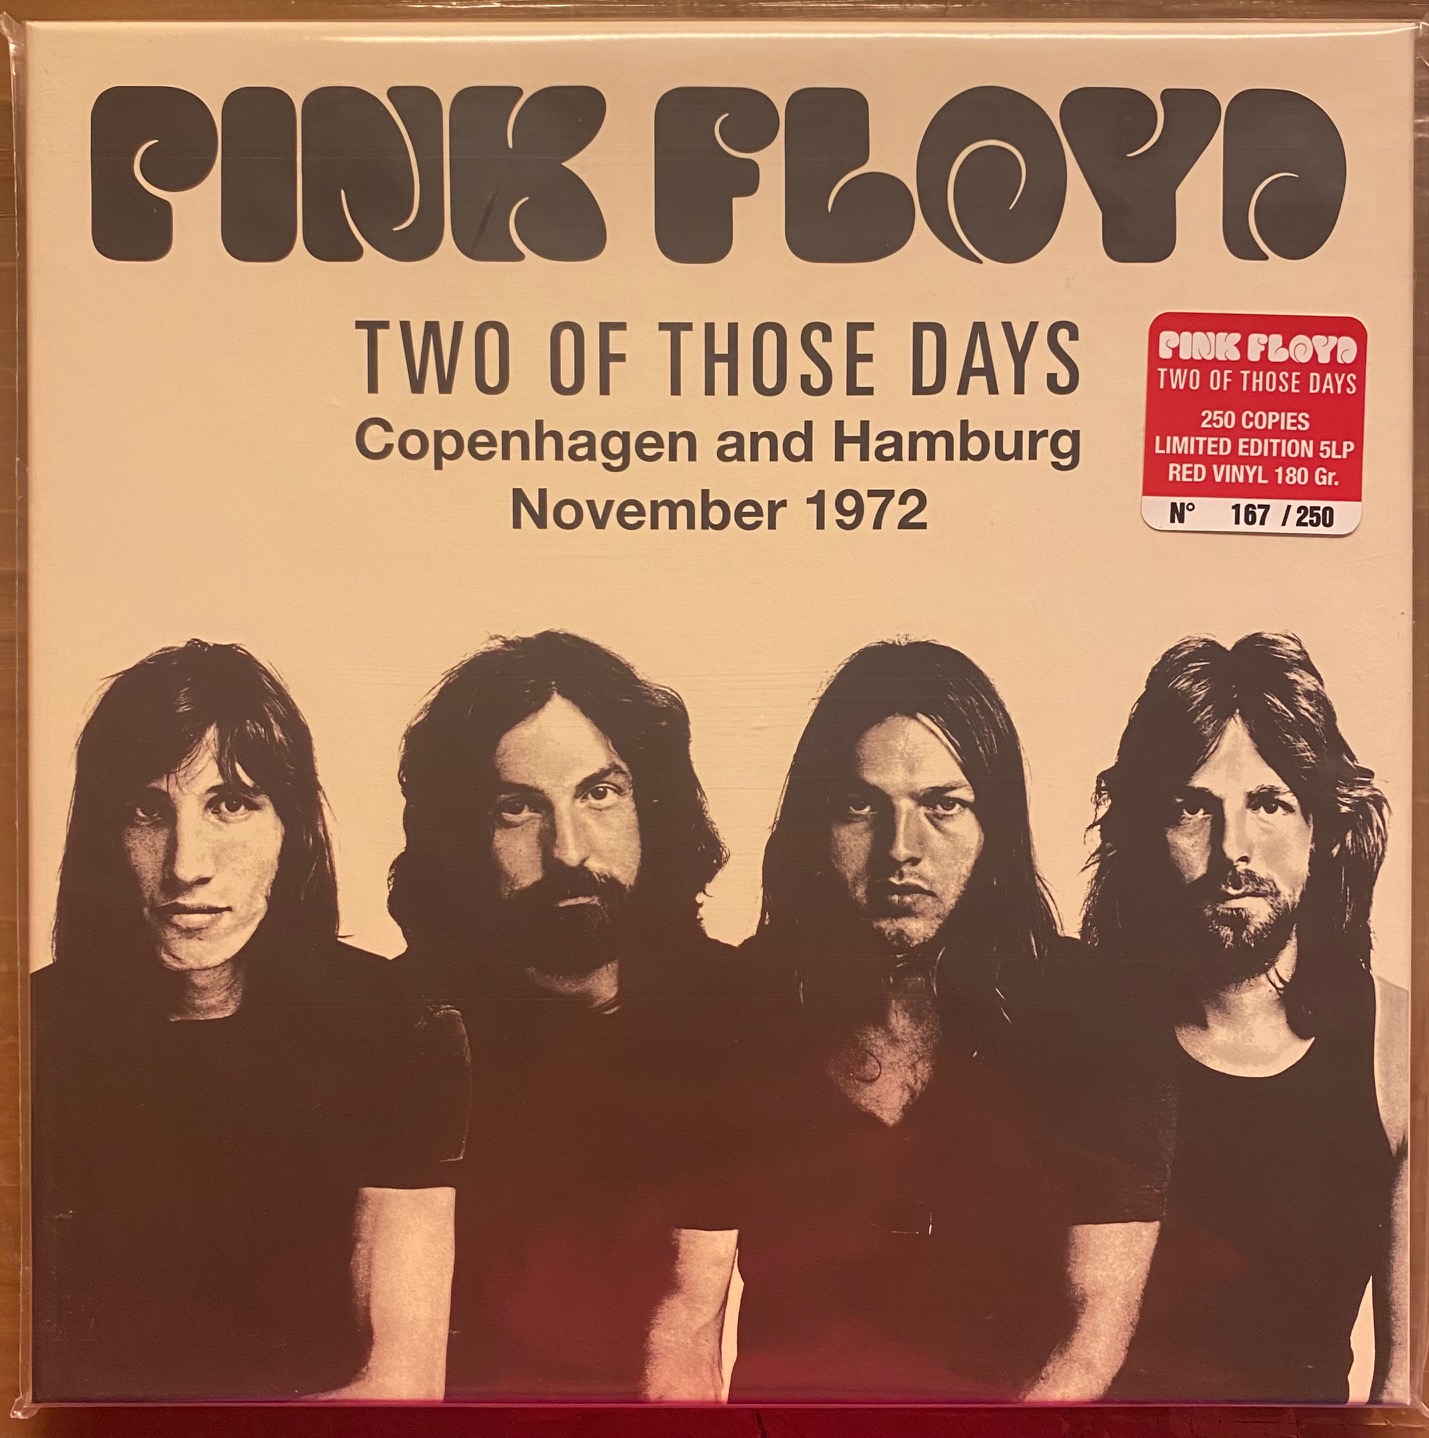 PINK FLOYD - TWO OF THESE DAYS: COPENHAGEN AND HAMBURG 1972 - LIMITED COLORED & NUMBERED